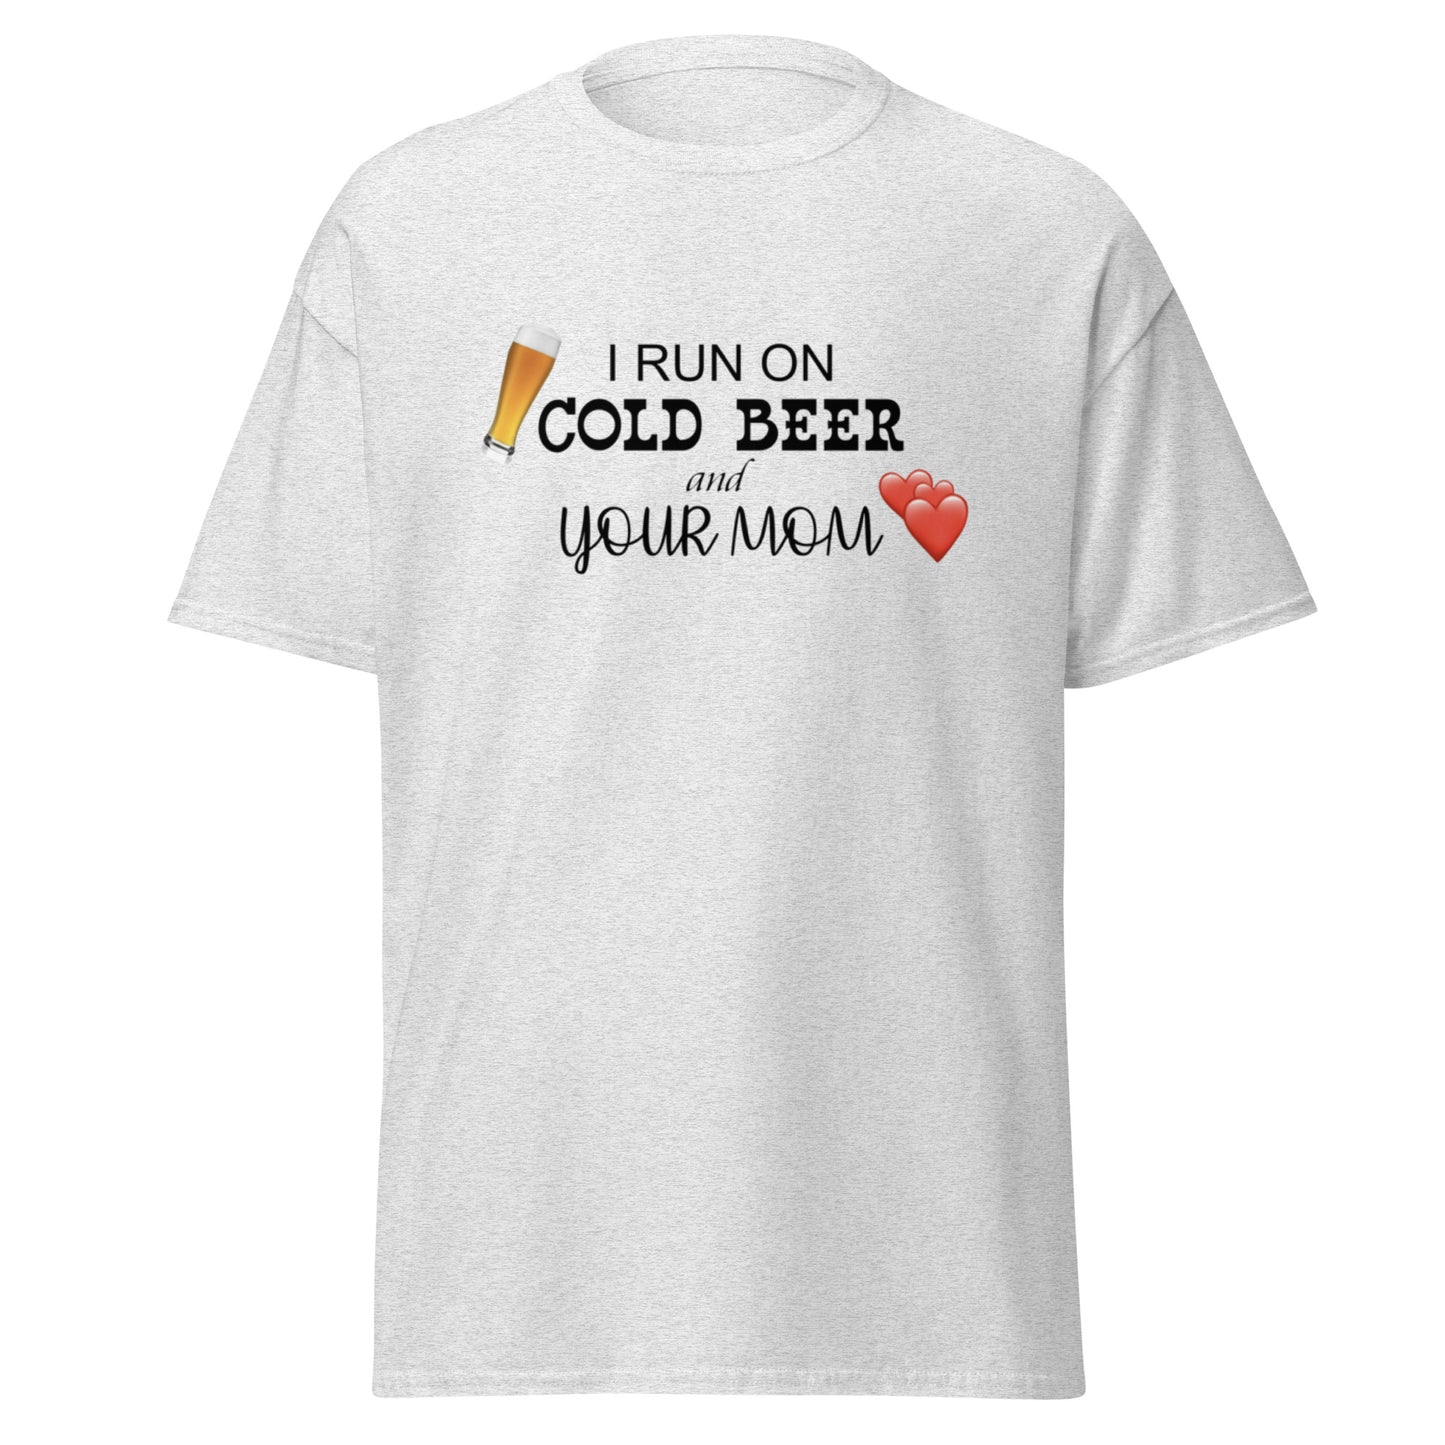 I RUN ON COLD BEER AND YOUR MOM TEE